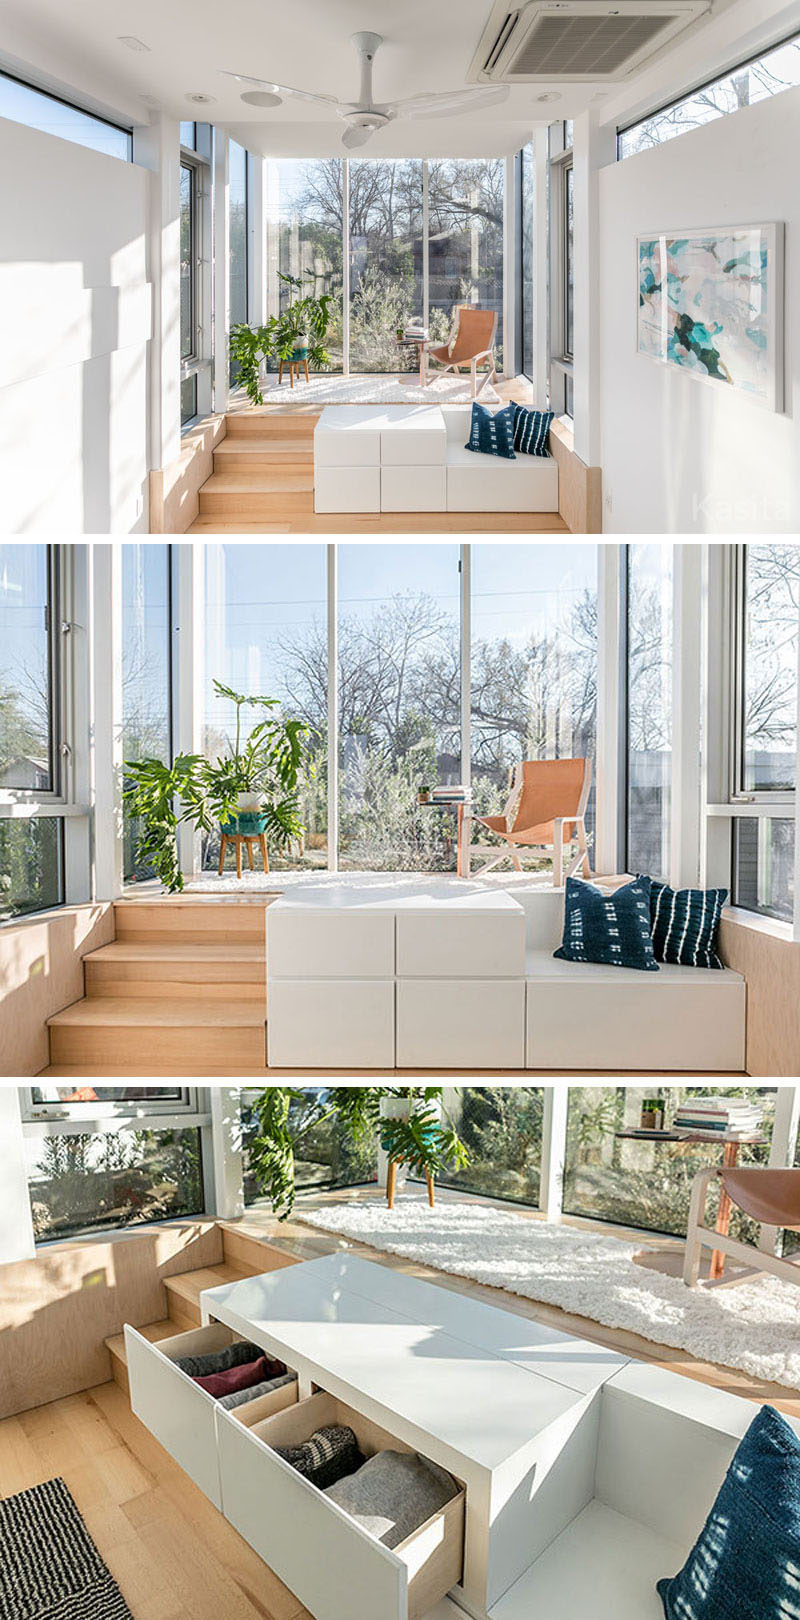 In this modern tiny house, there's a raised platform that's surrounded by floor to ceiling windows, allowing plenty of light to fill the small space. A flat-screen television is hidden within the white storage cube with drawers, that also has a small bench next to it.  #TinyHouse #TinyHome #Architecture #SmallLiving #ModernTinyHouse #SmallHouse